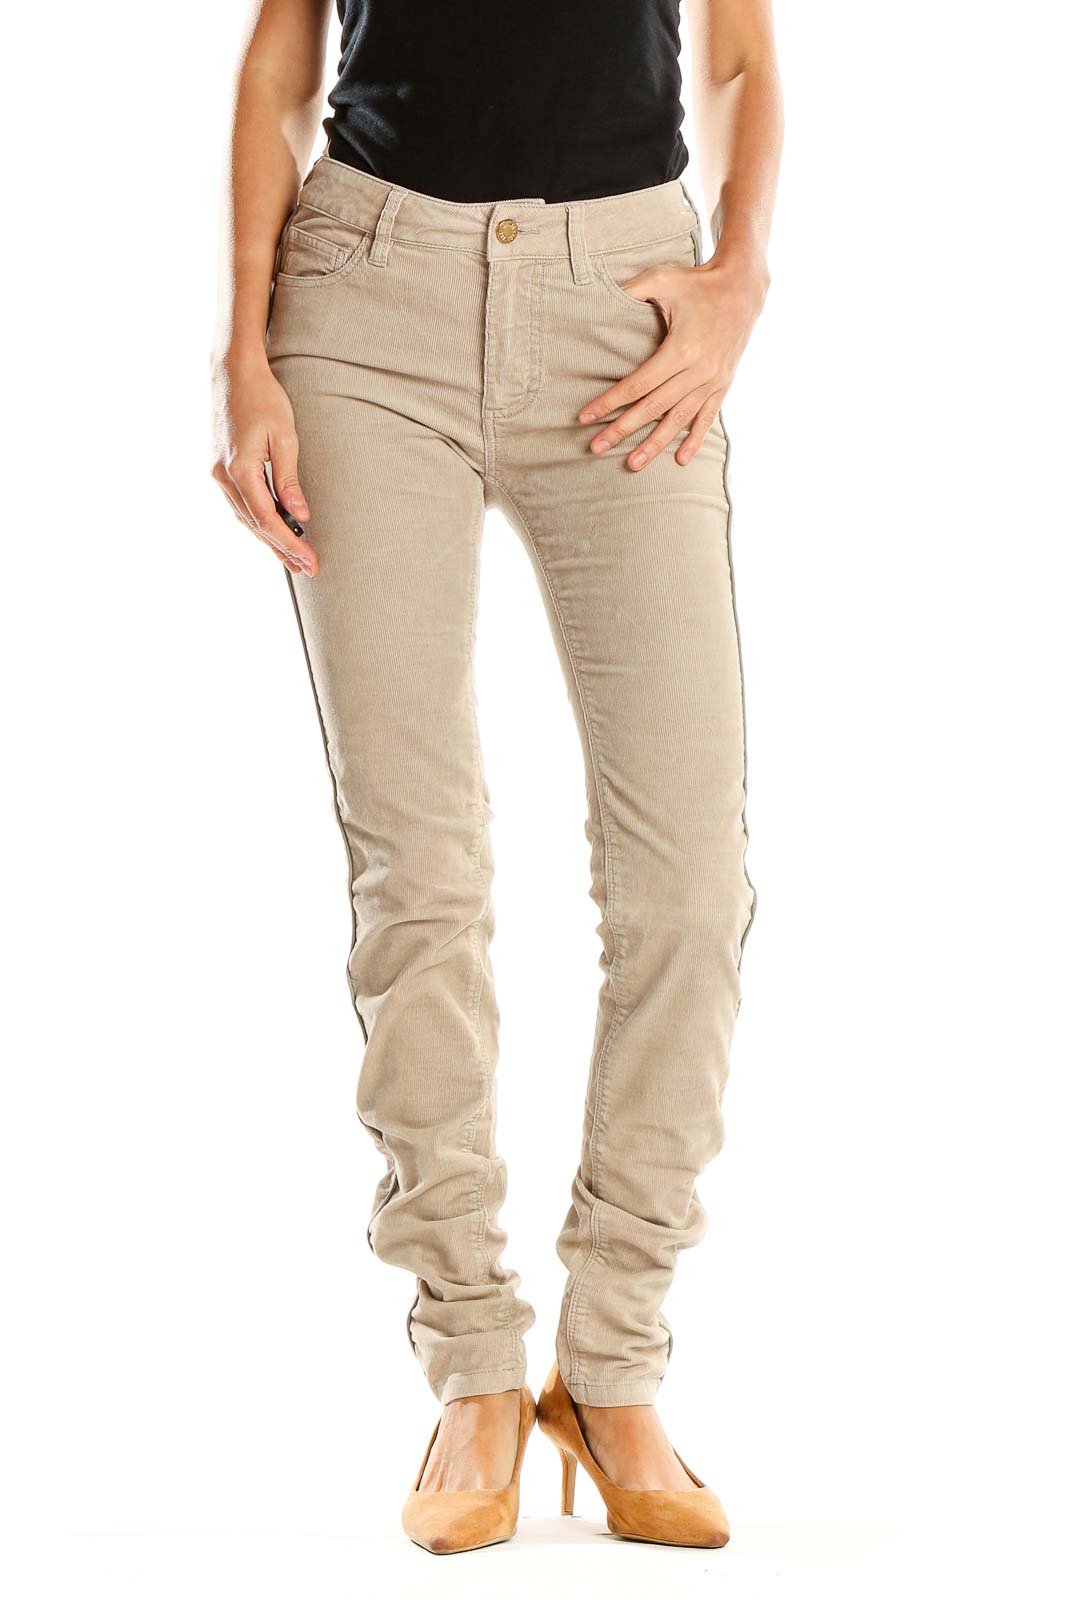 Beige Corduroy Piped Skinny Pants Front